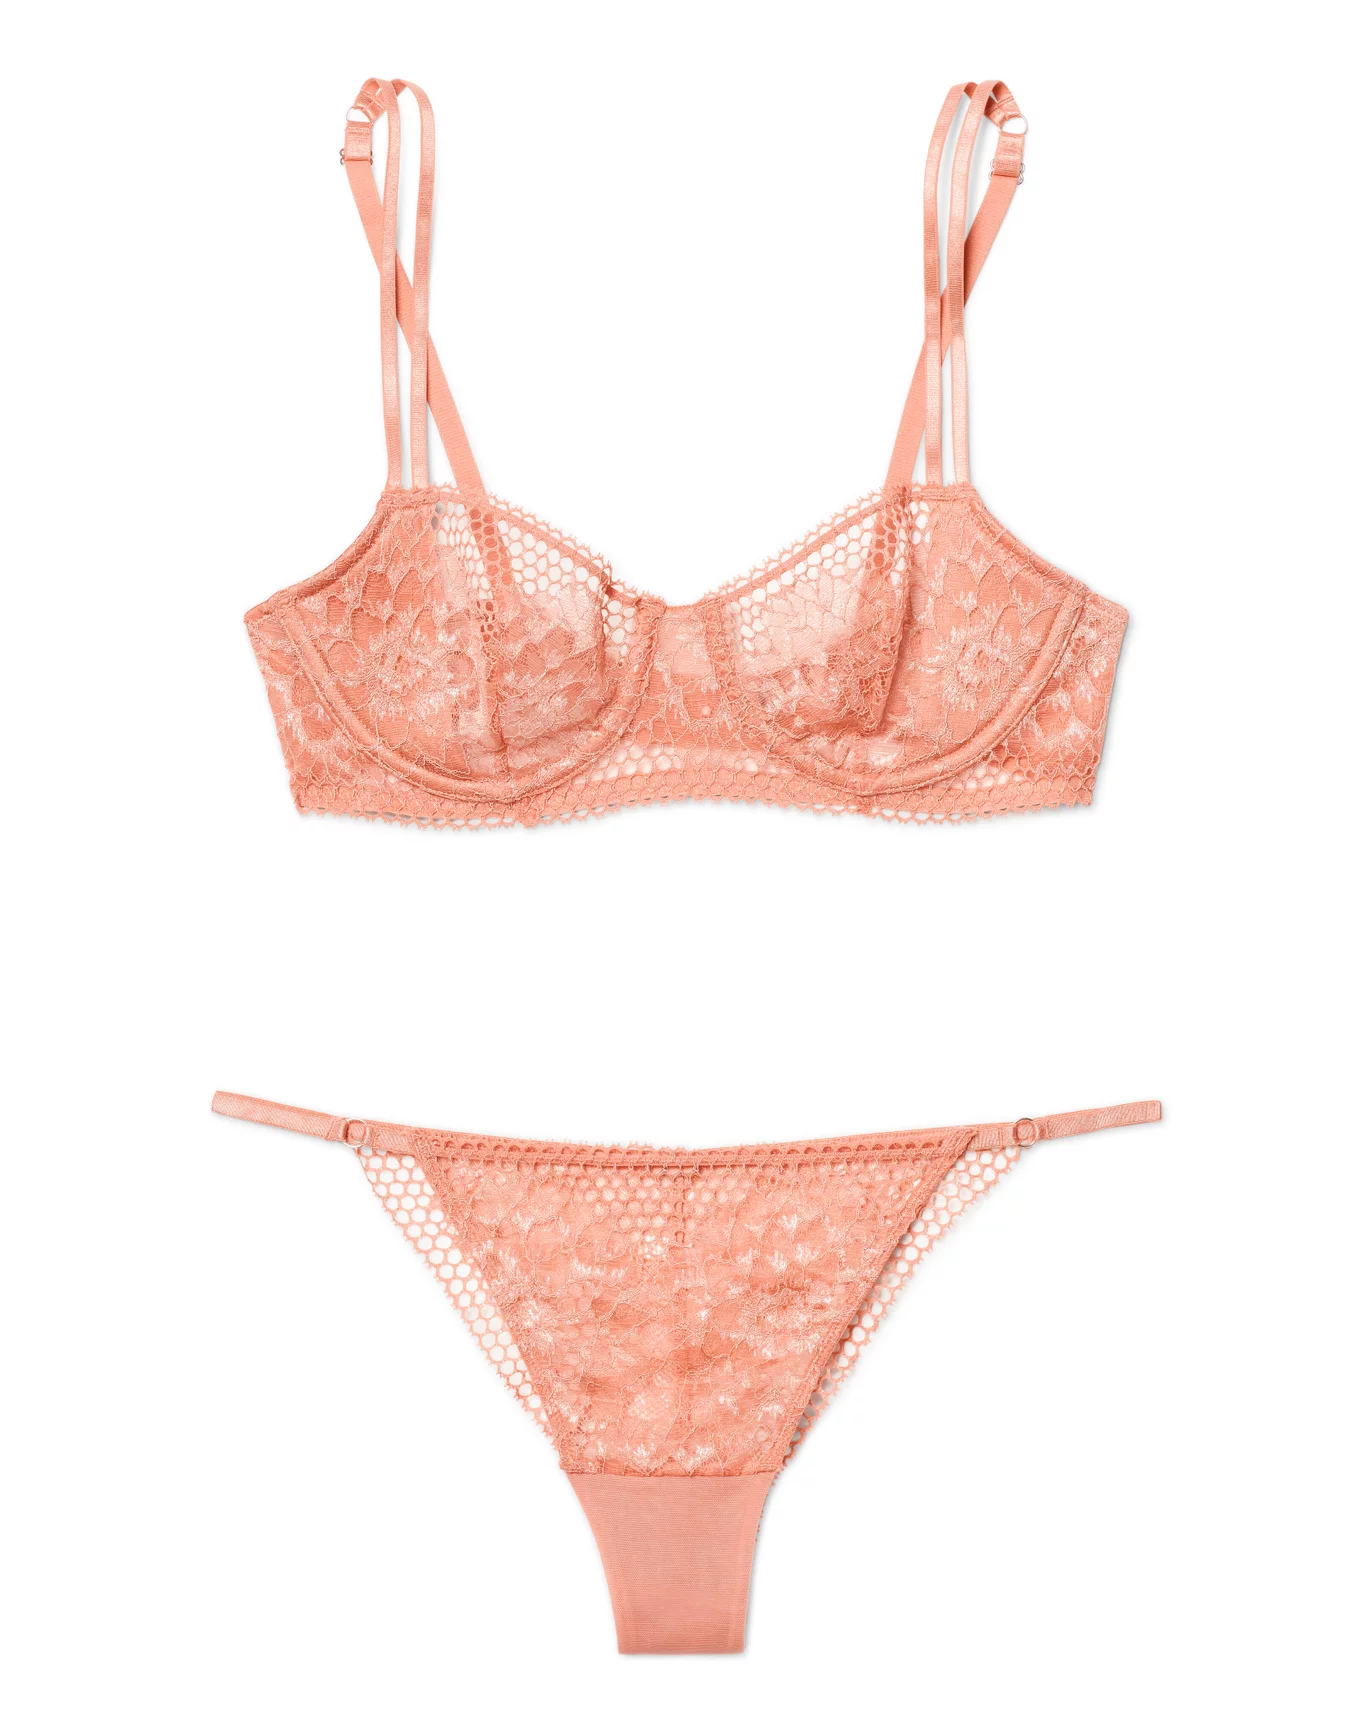 Victoria's Secret very sexy Wicked Unlined Bra Cheeky Set Lace Coral